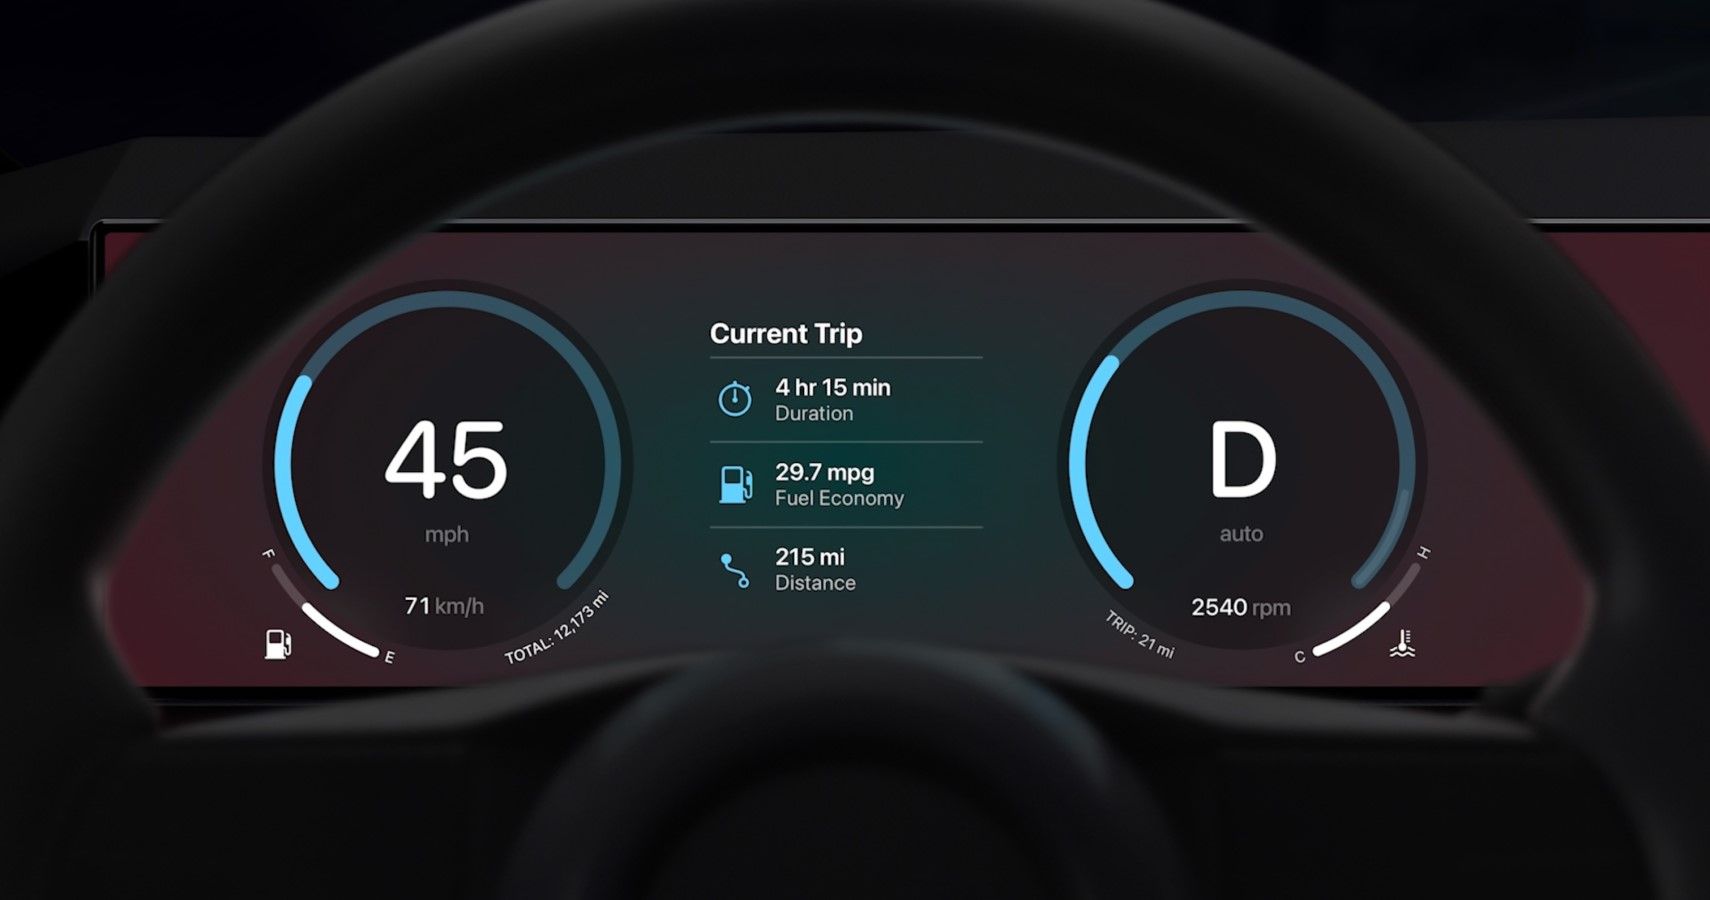 Next-gen Apple CarPlay integrated into the car instrument cluster